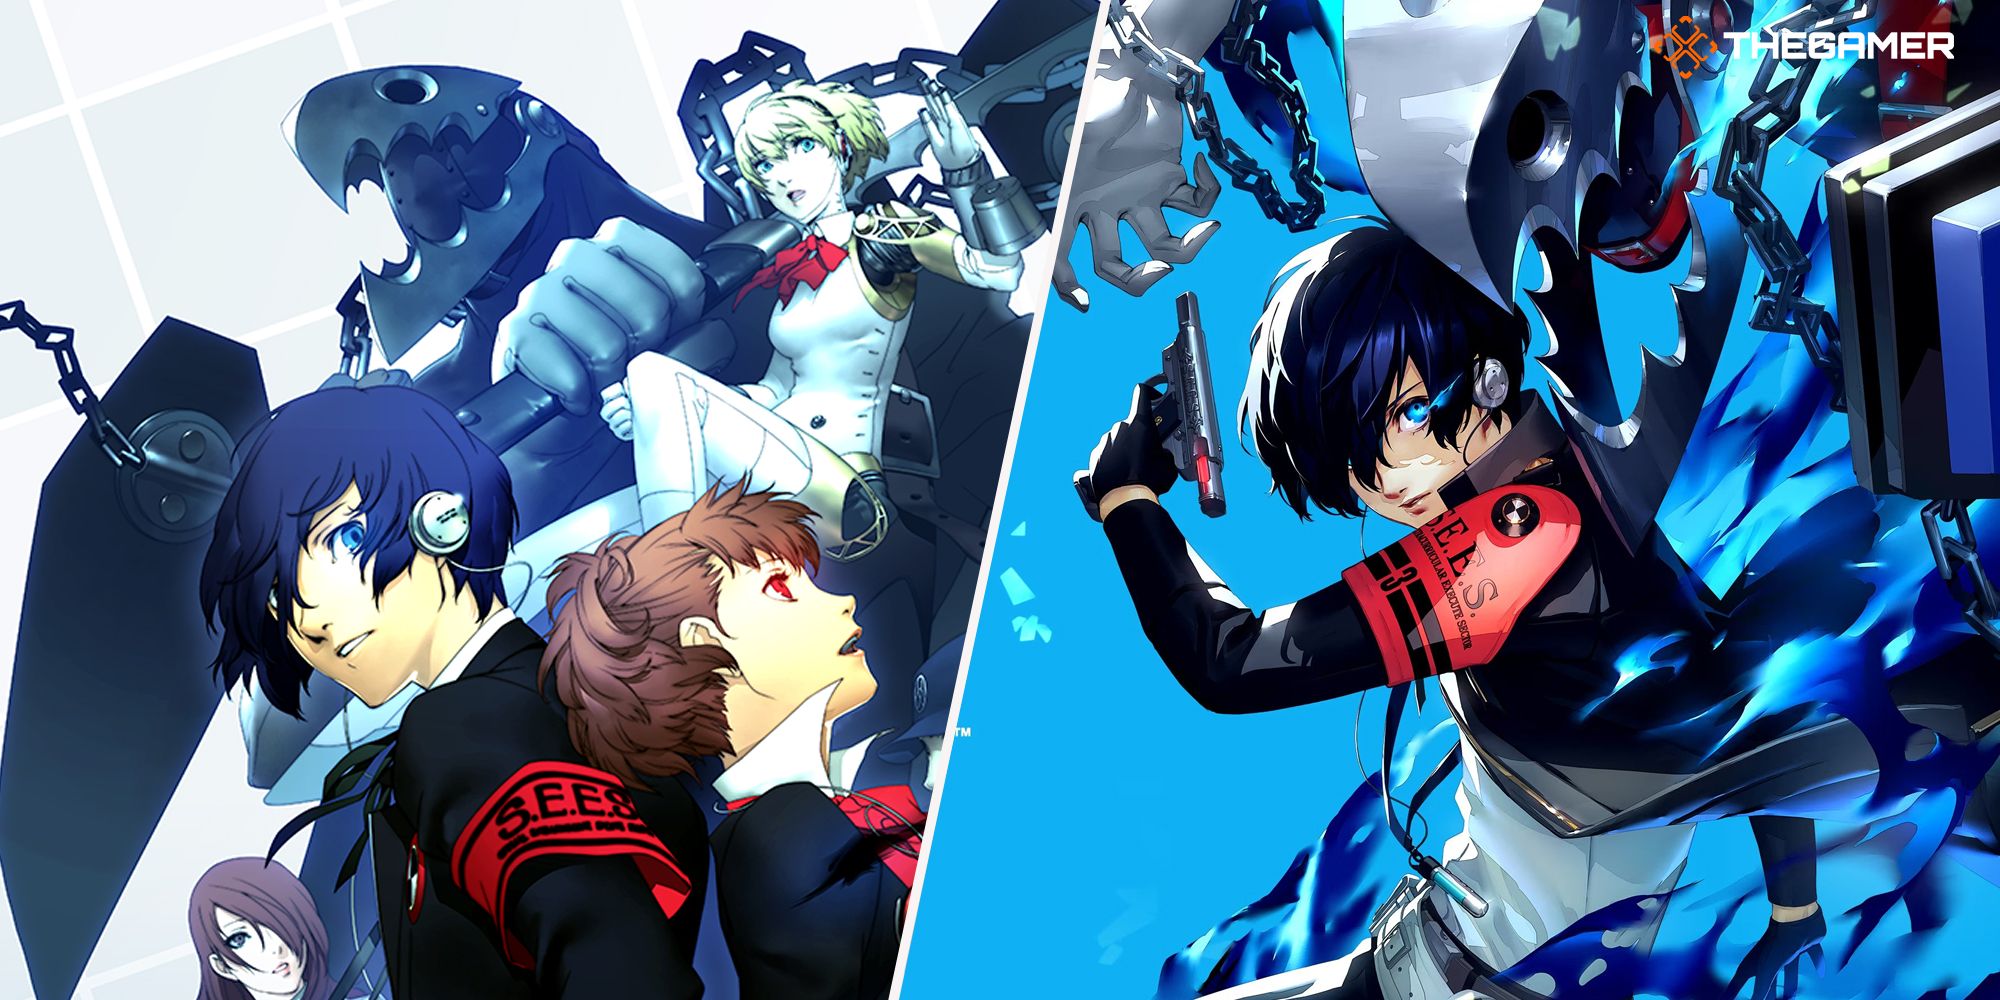 combined images of Persona 3 Portable and Persona 3 Reload cover art